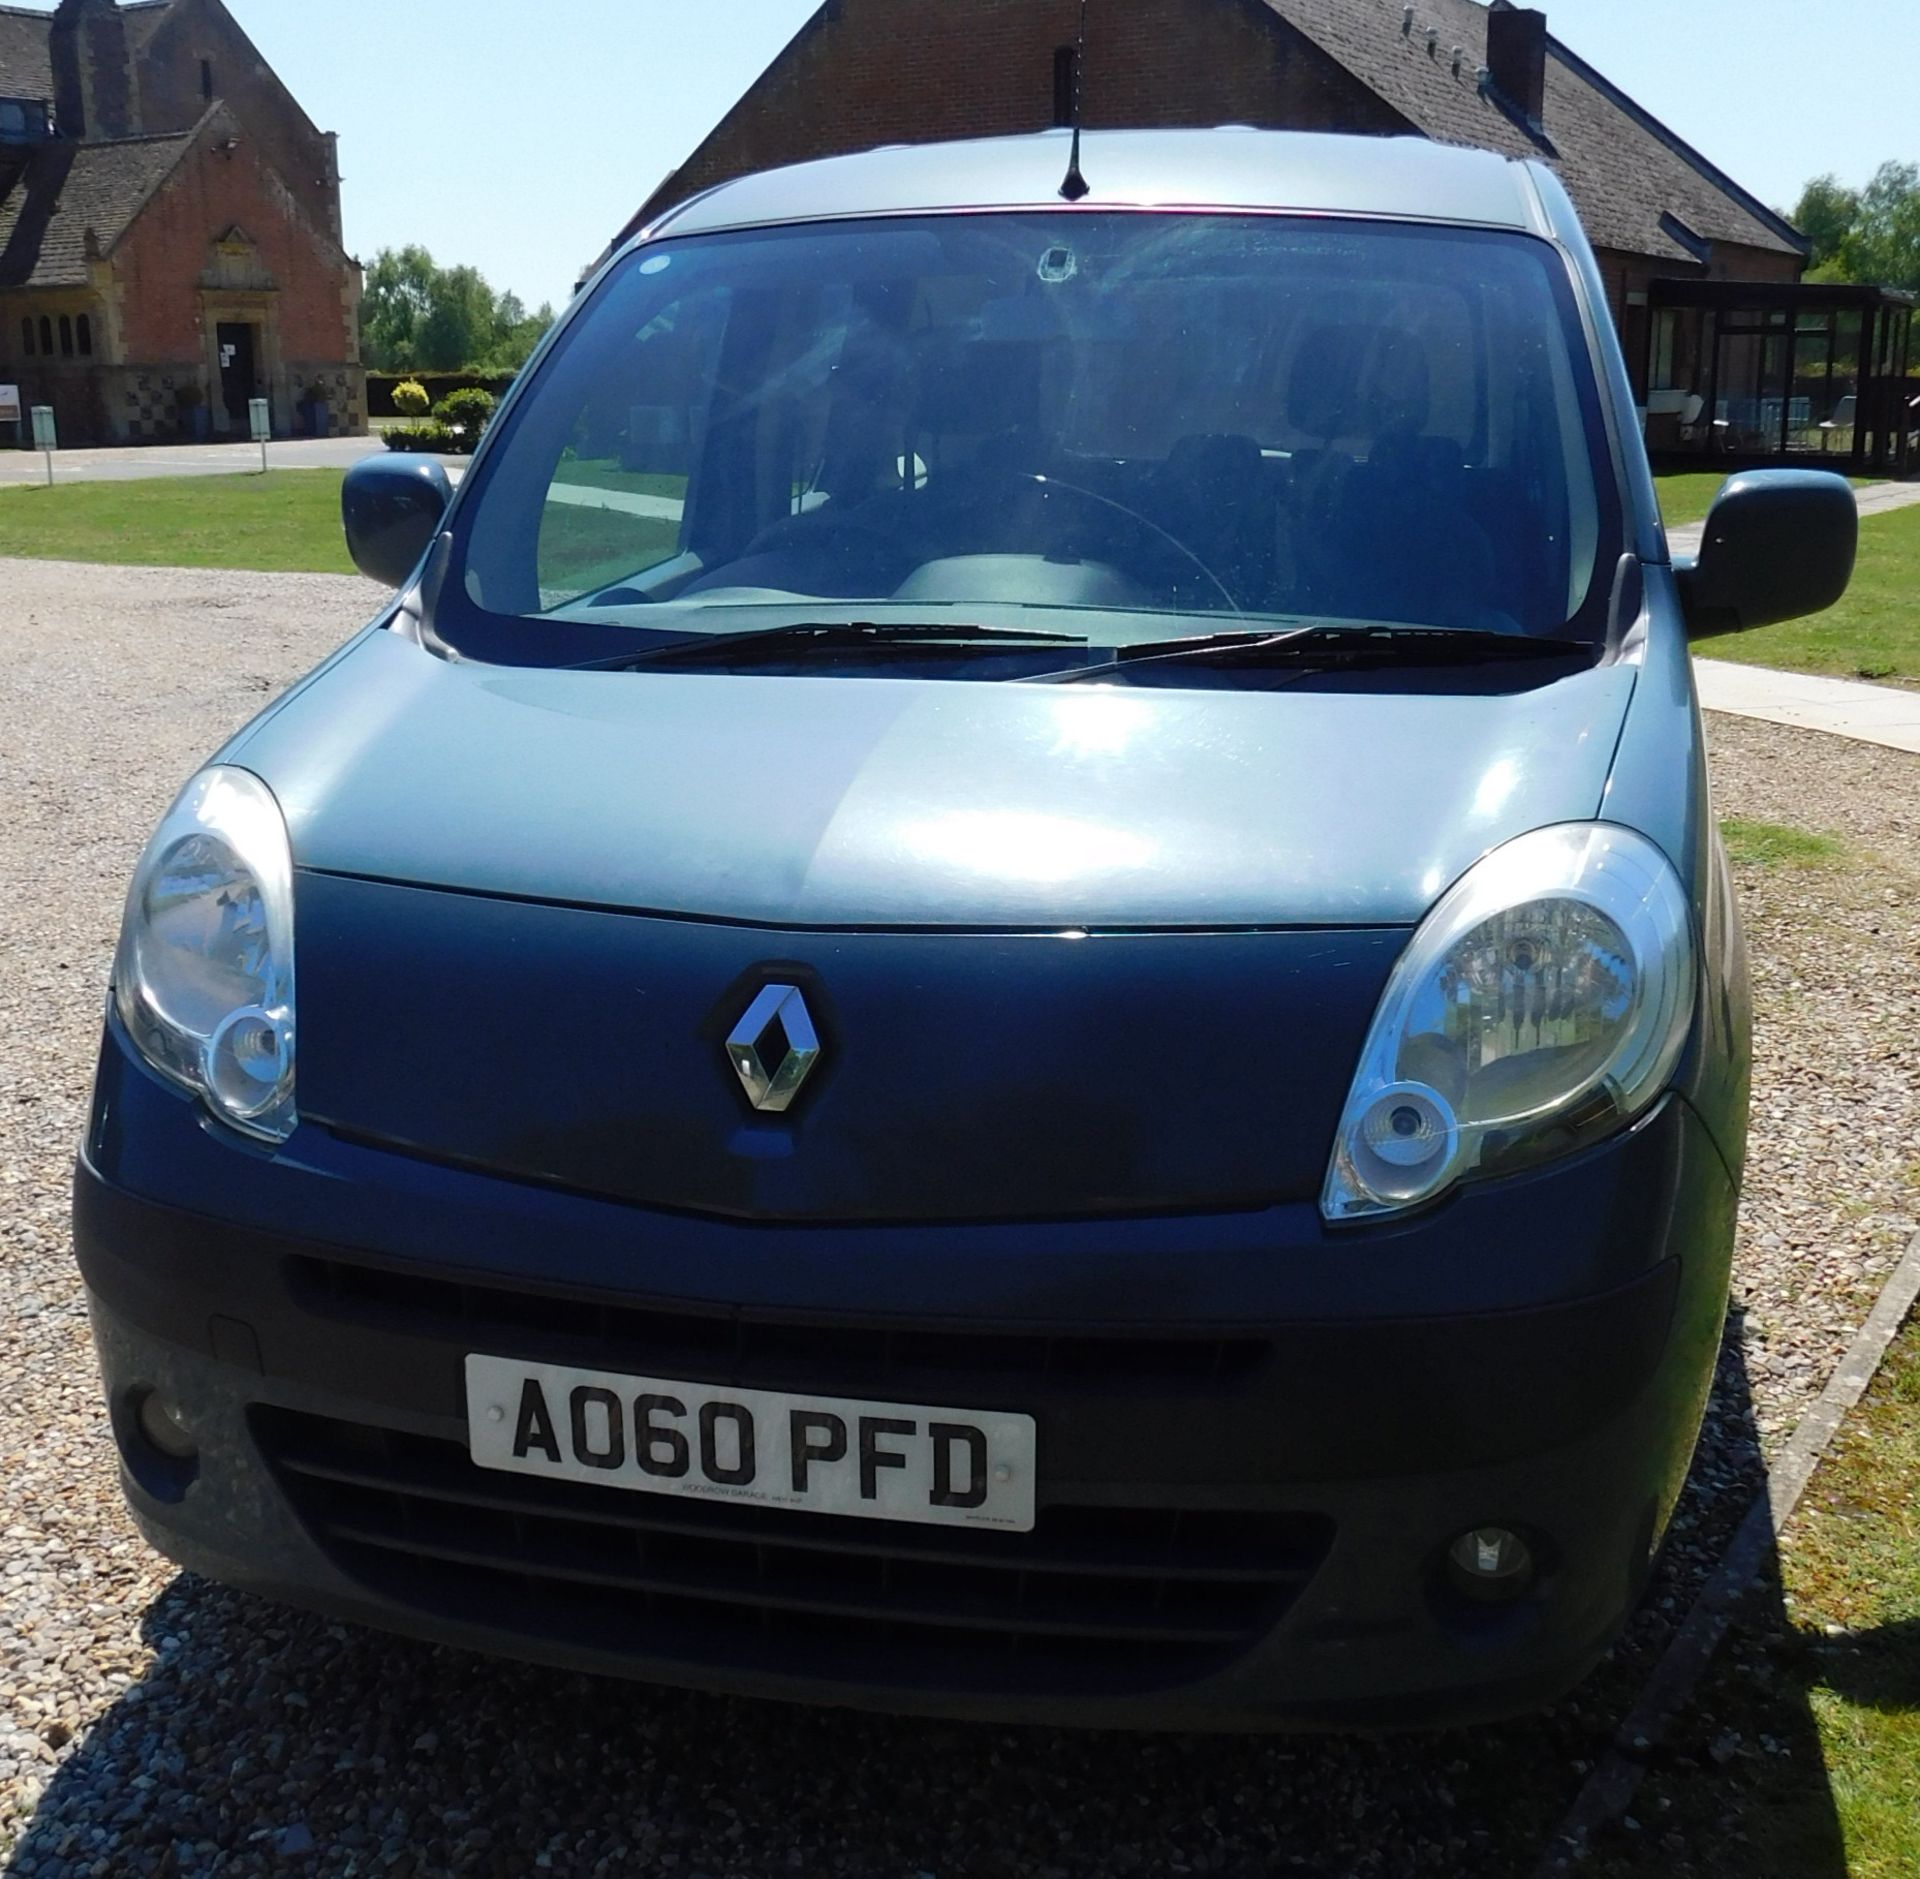 Renault Kangoo 1.45 DCi 110 Expression, Registration AO60 PFD, First Registered 26th November - Image 8 of 23